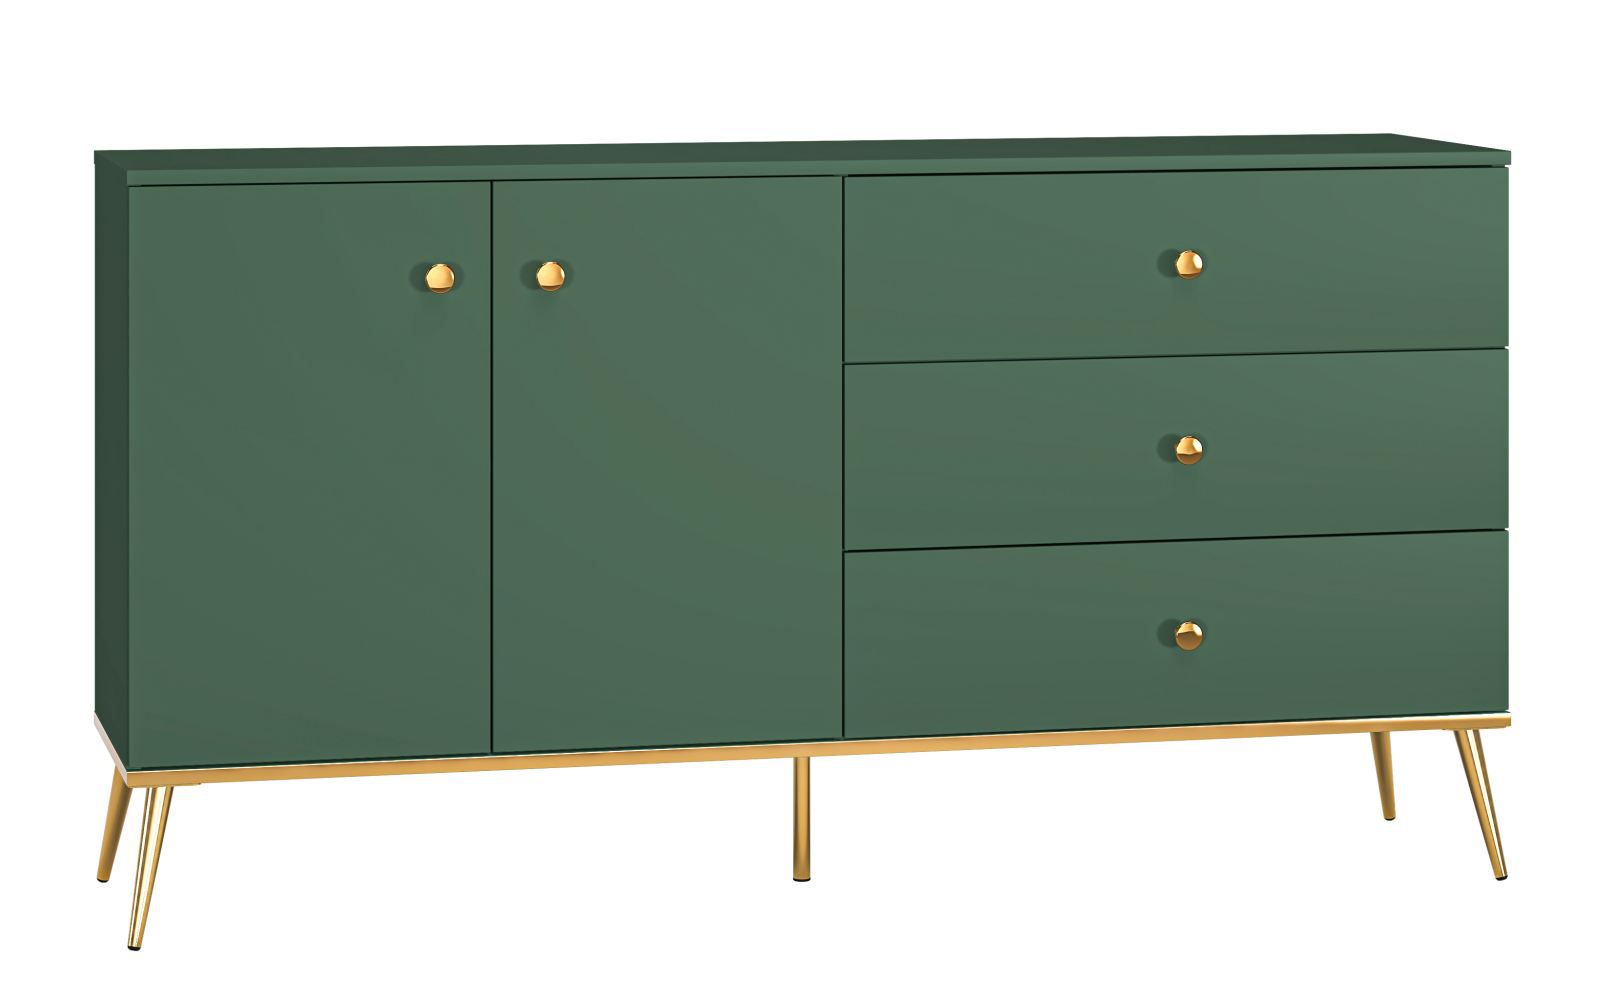 Chest of drawers Inari 03, Colour: Forest Green - Measurements: 85 x 160 x 40 cm (h x w x d), with 2 doors, 3 drawers and 2 shelves